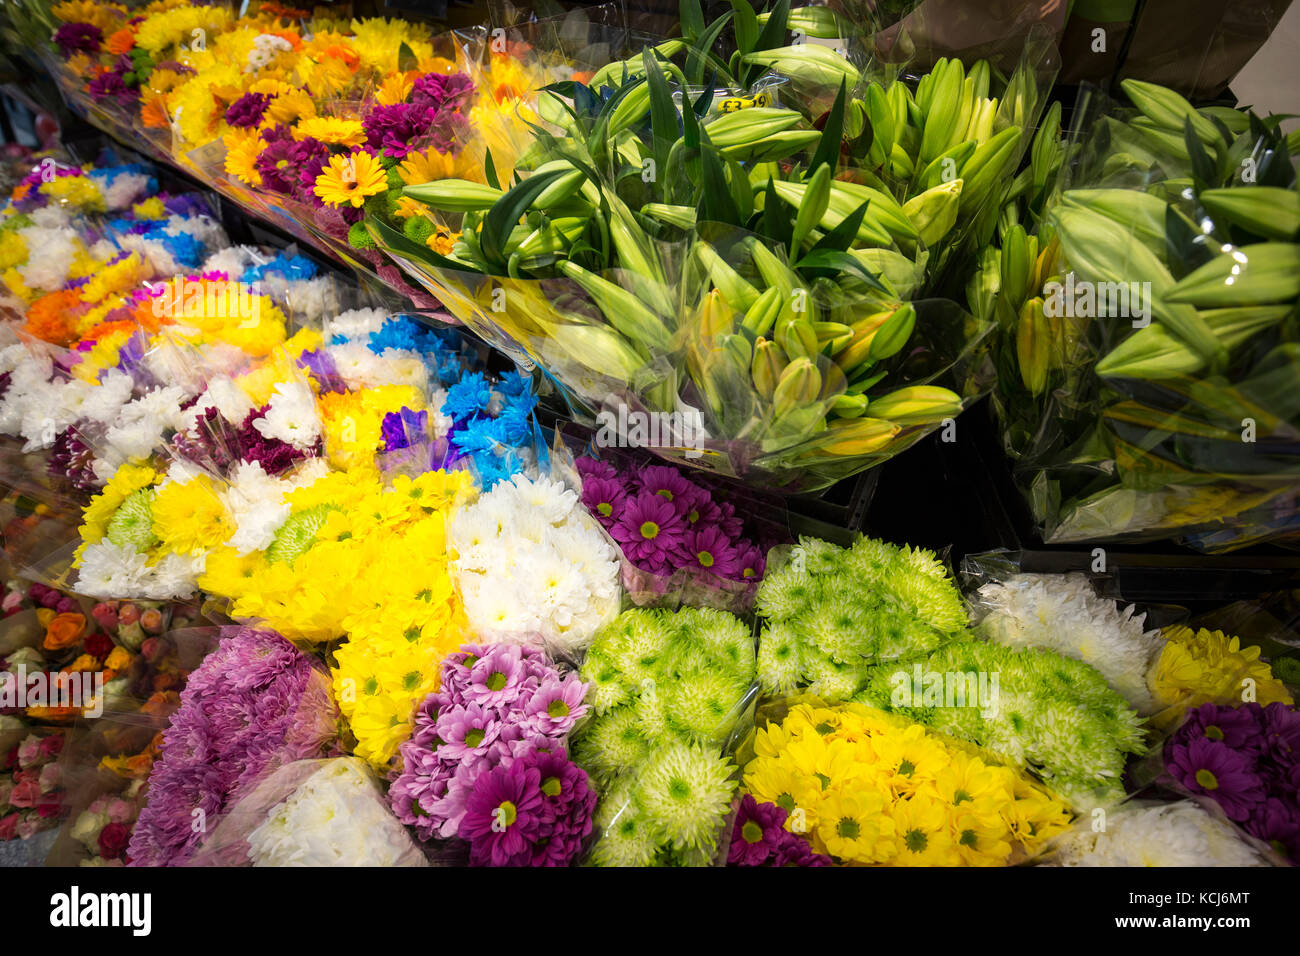 bunches of flowers for sale in a supermarket Stock Photo